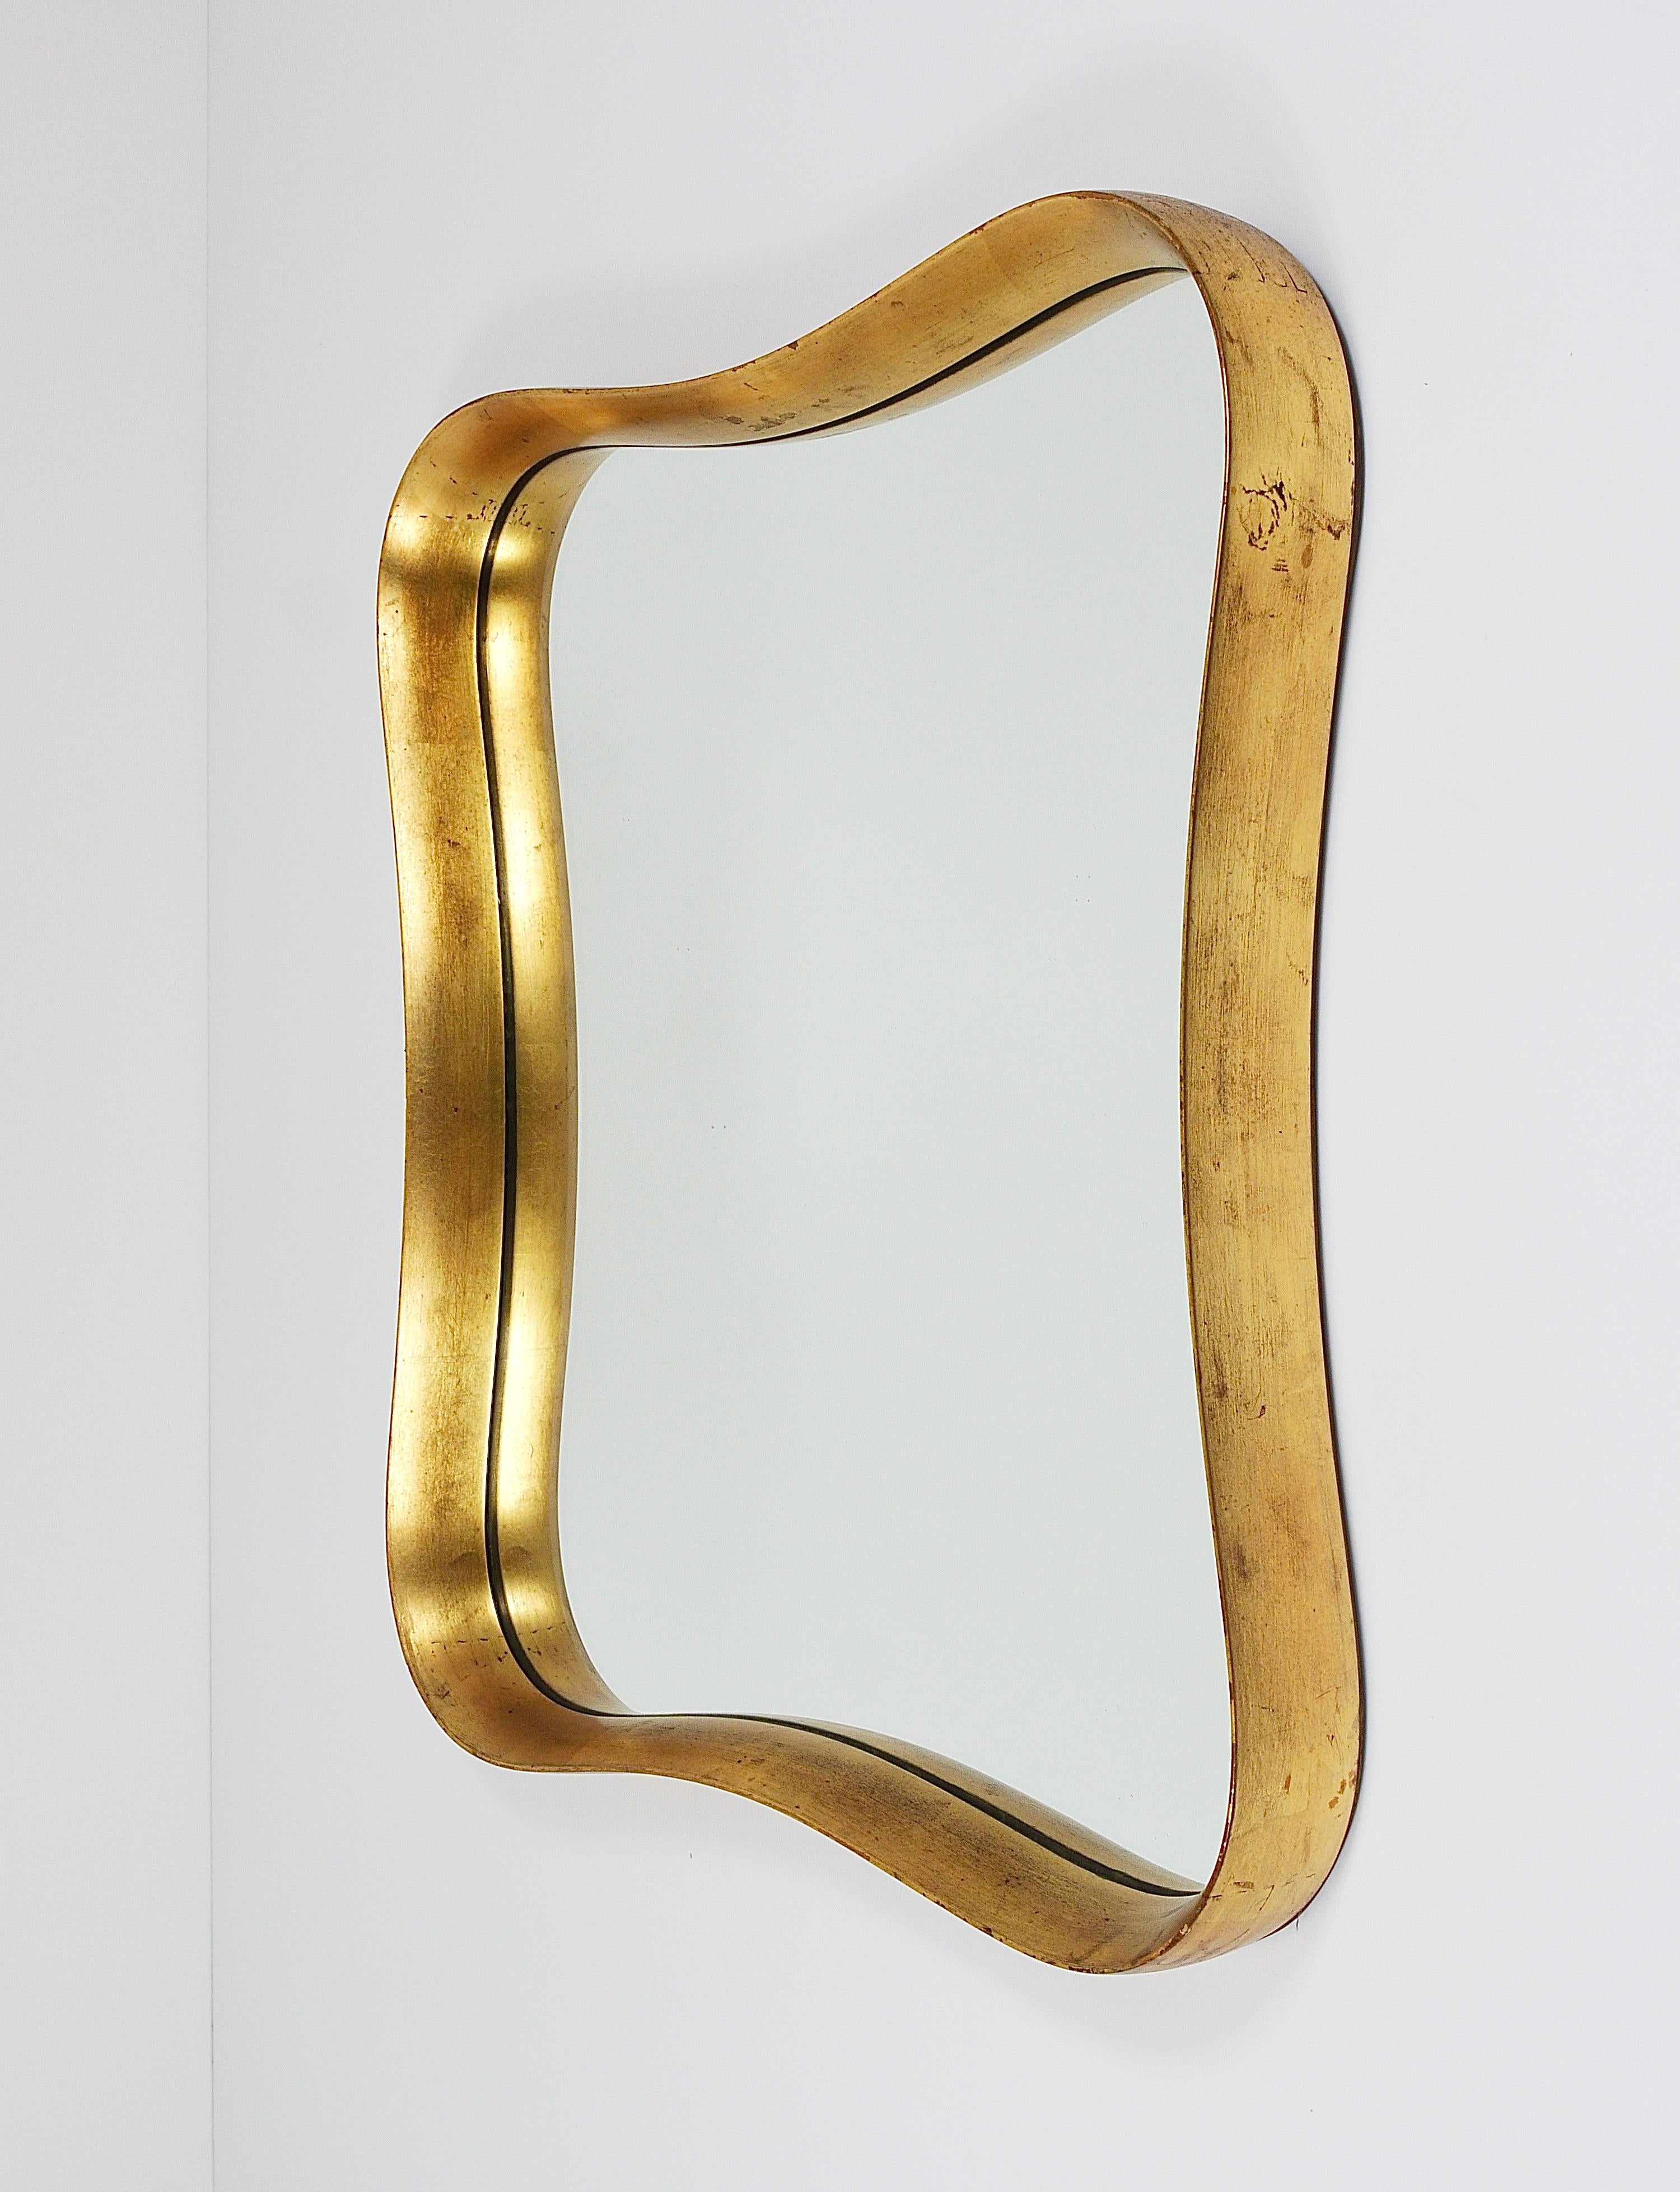 A wonderful Austrian modernist wall mirror with a lovely curved gold-plated lime wood frame from the 1940s. Manufactured by Max Welz Vienna, Austria. In very good condition with charming patina on the gold leaf finish. In the style of Gio Ponti.
